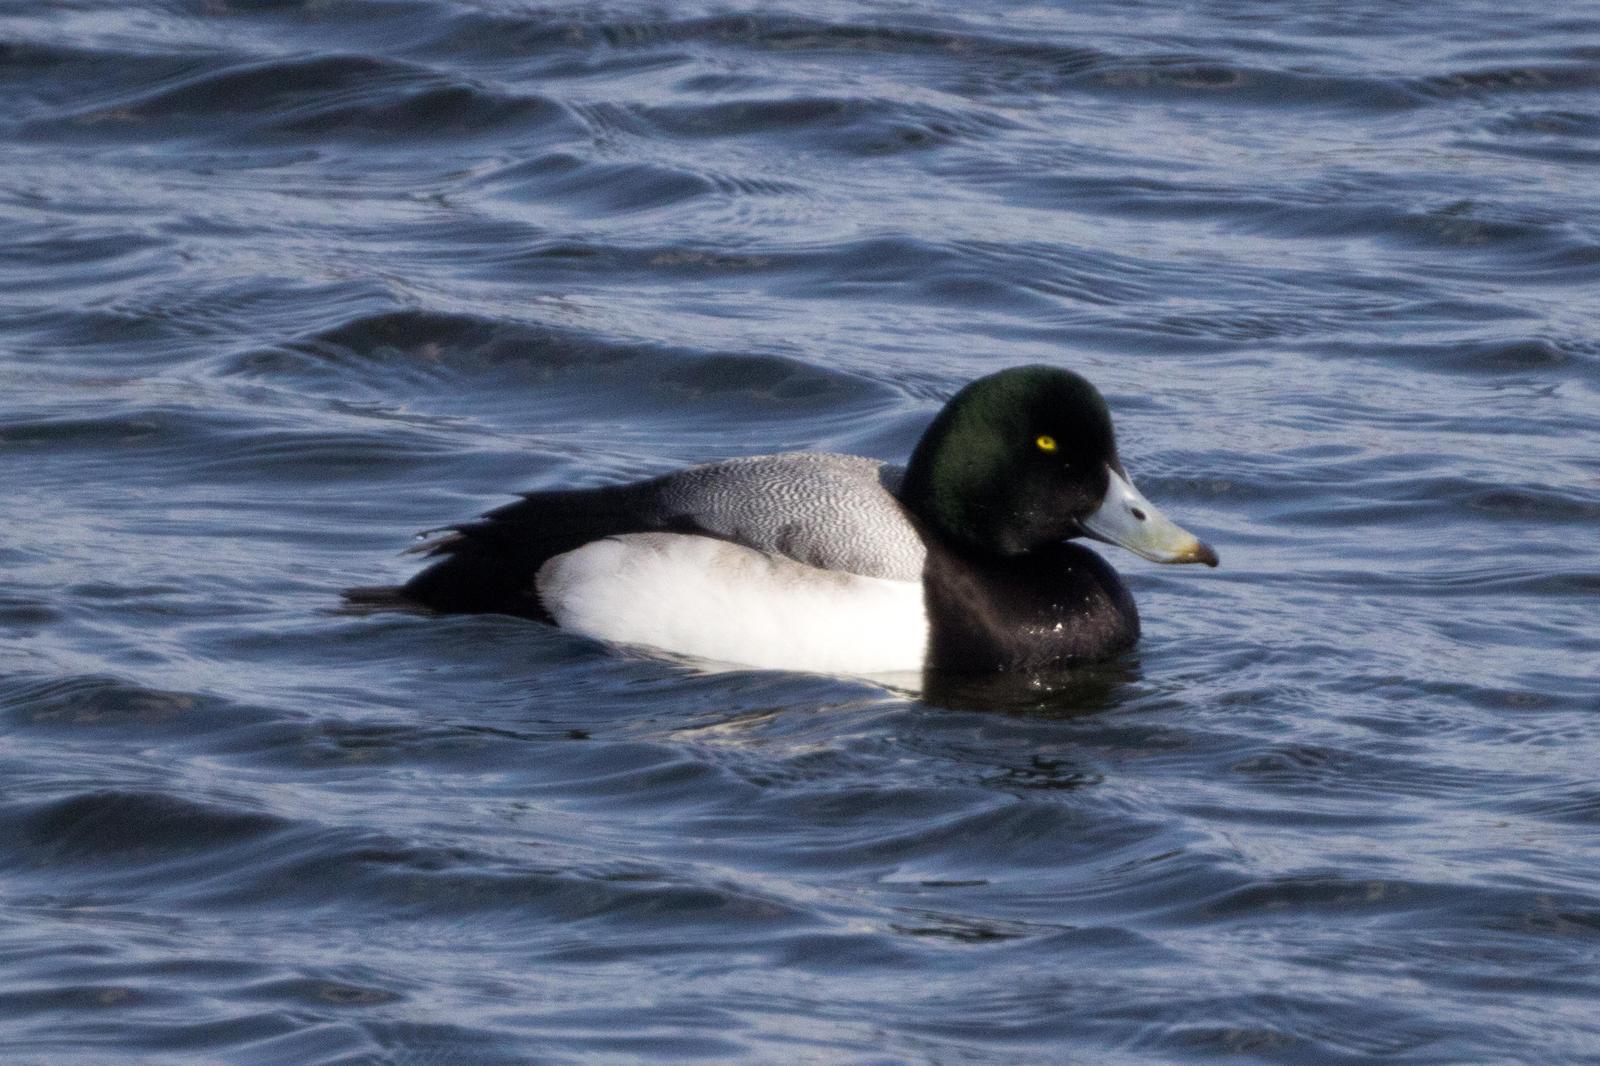 Greater Scaup Photo by Darrin Menzo